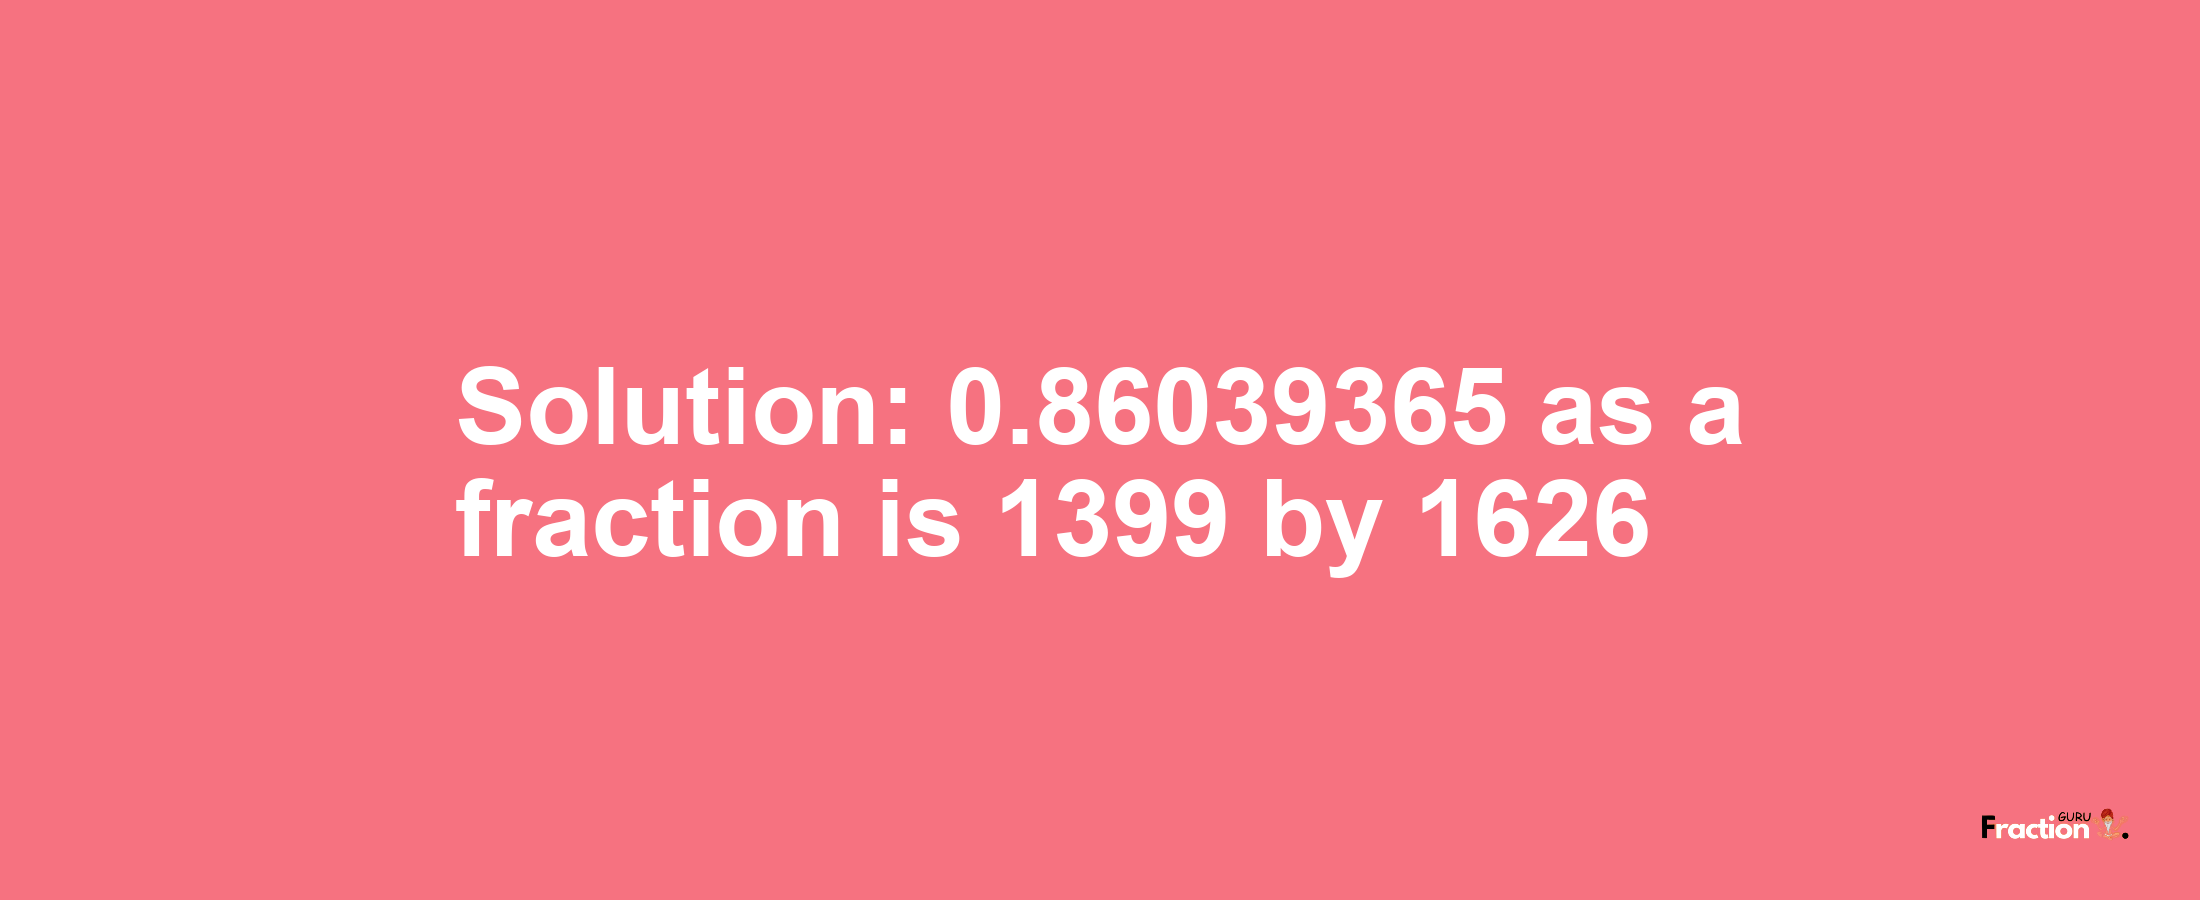 Solution:0.86039365 as a fraction is 1399/1626